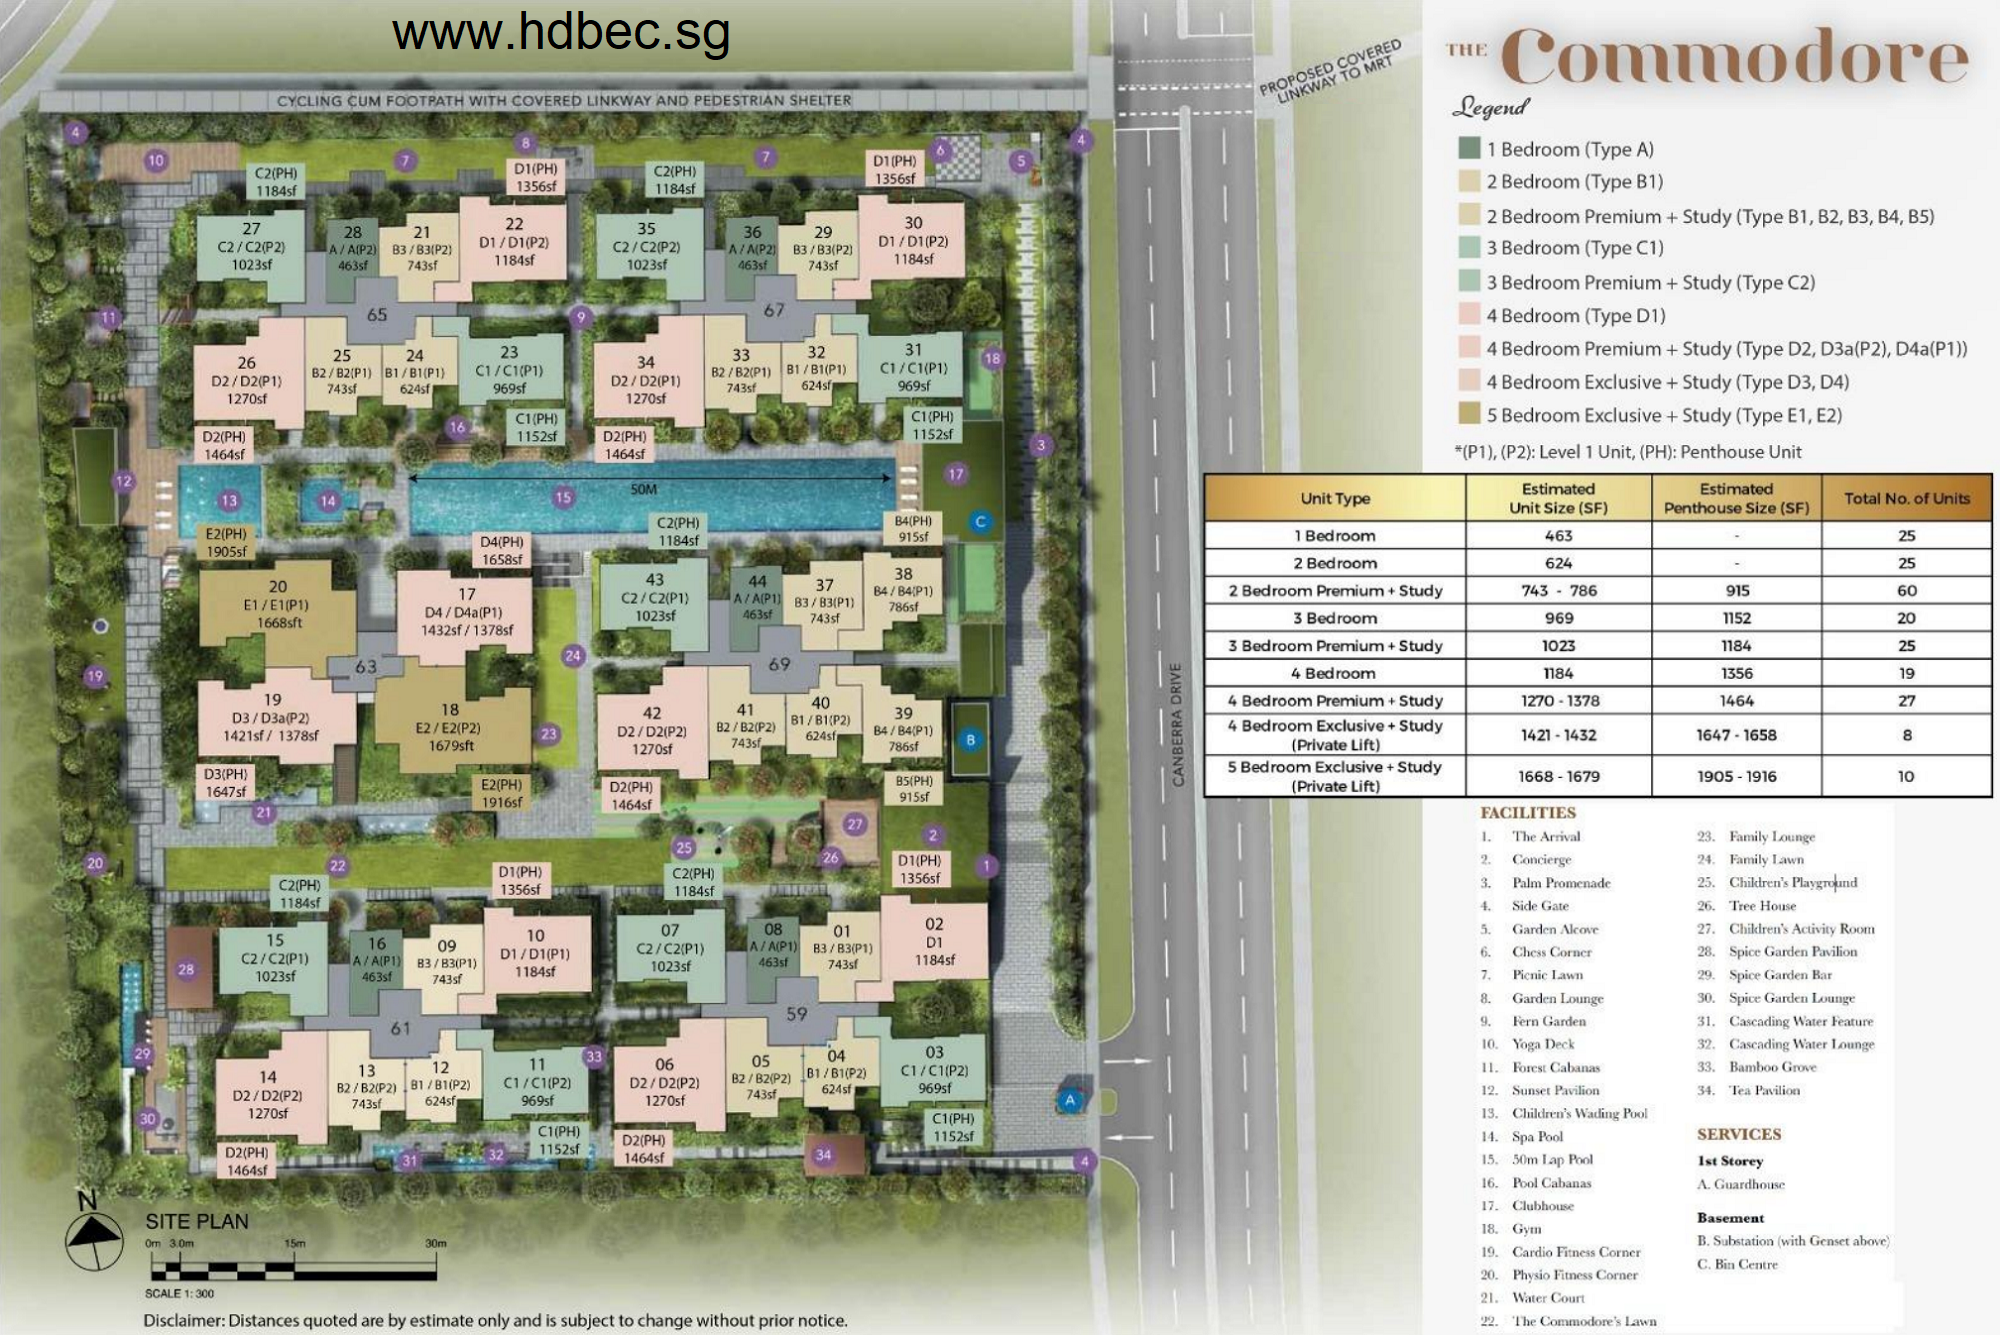 The Commodore Site Plan & Facilities with Room Type & Unit Mix